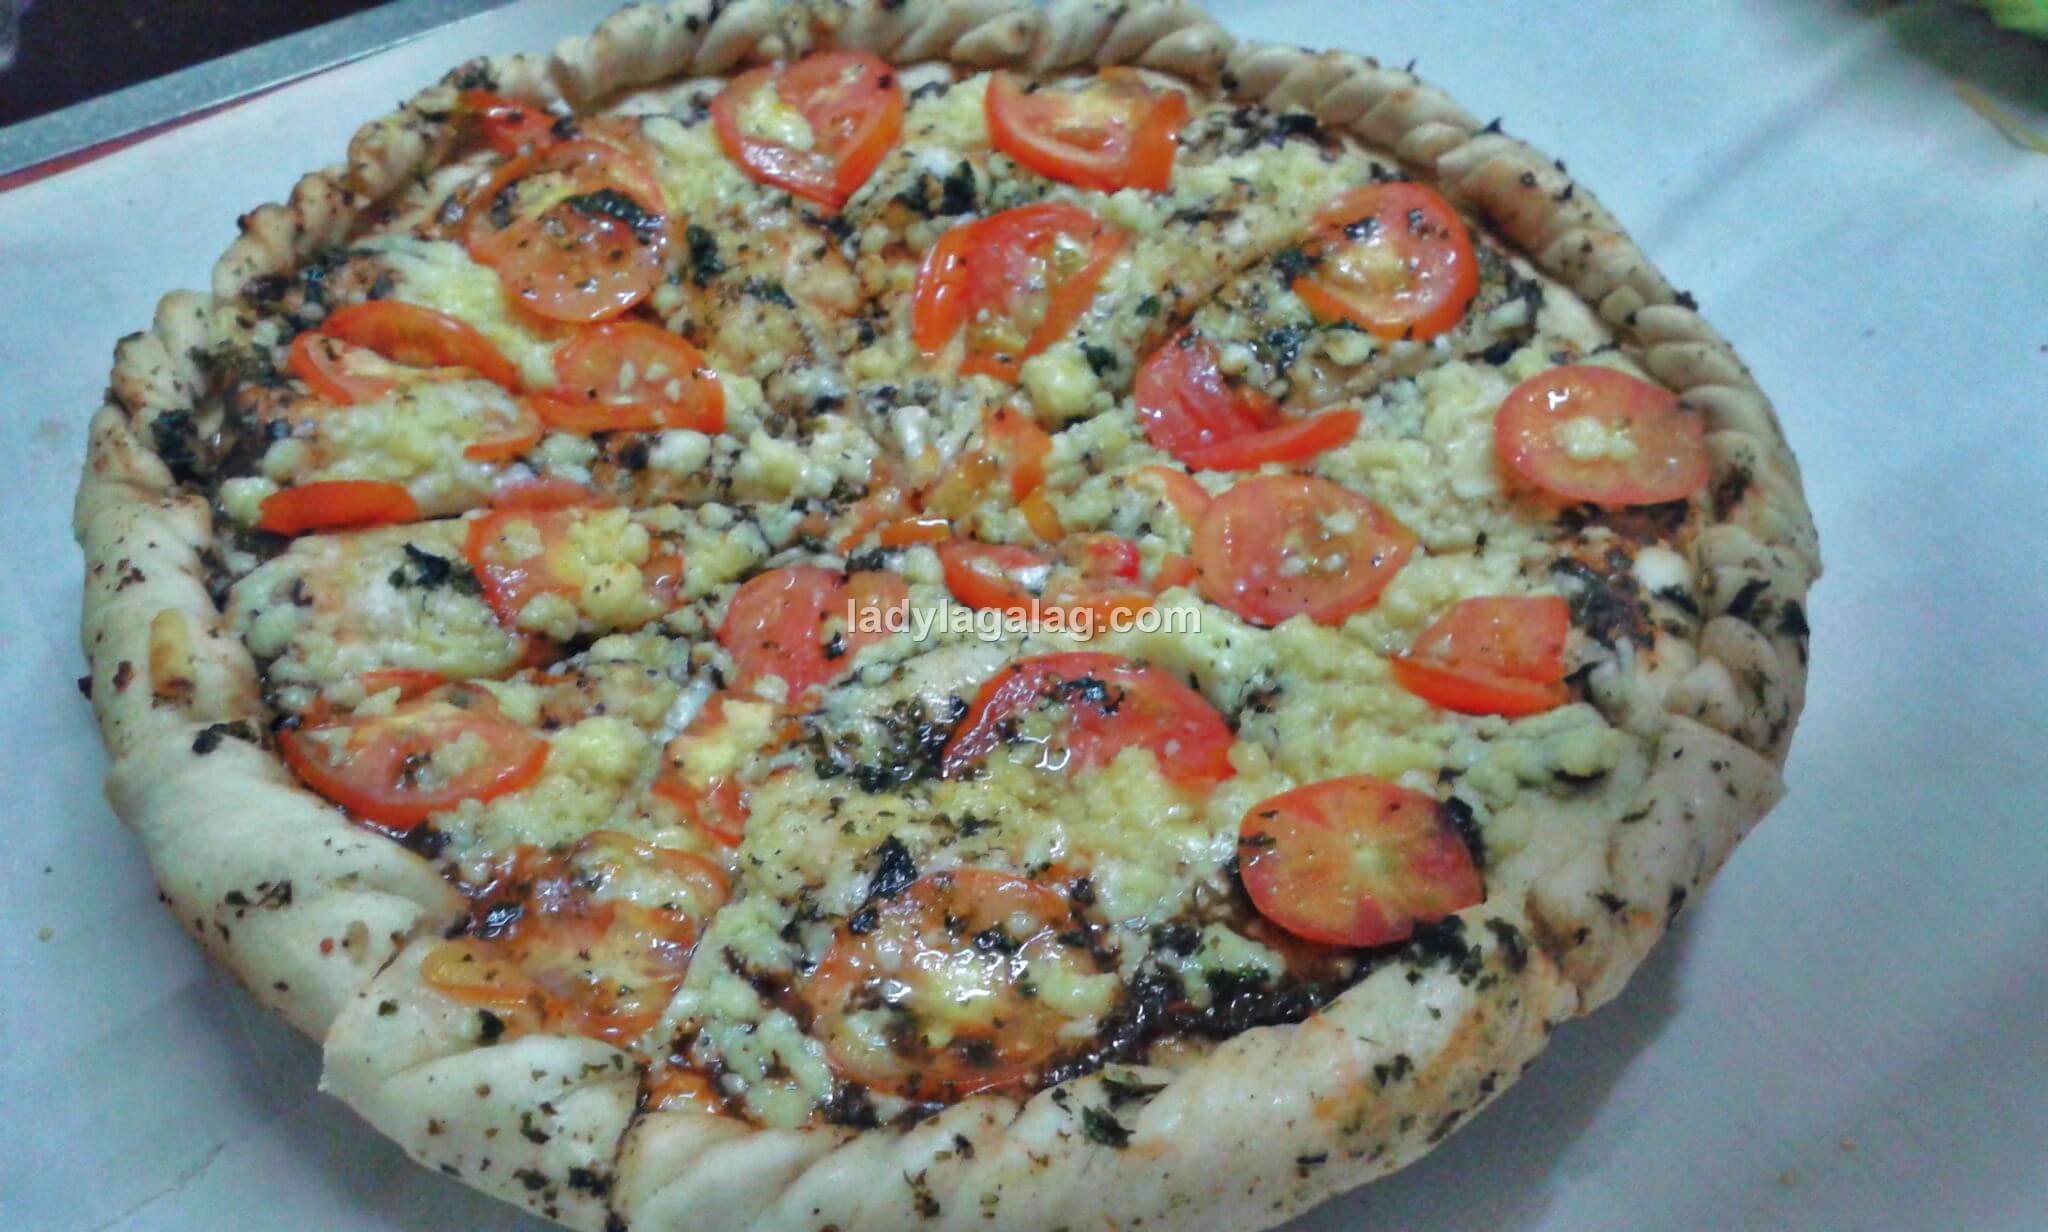 Chef Arnold’s Pizza, a pizza shop in Mandaluyong, offers fresh ingredients.